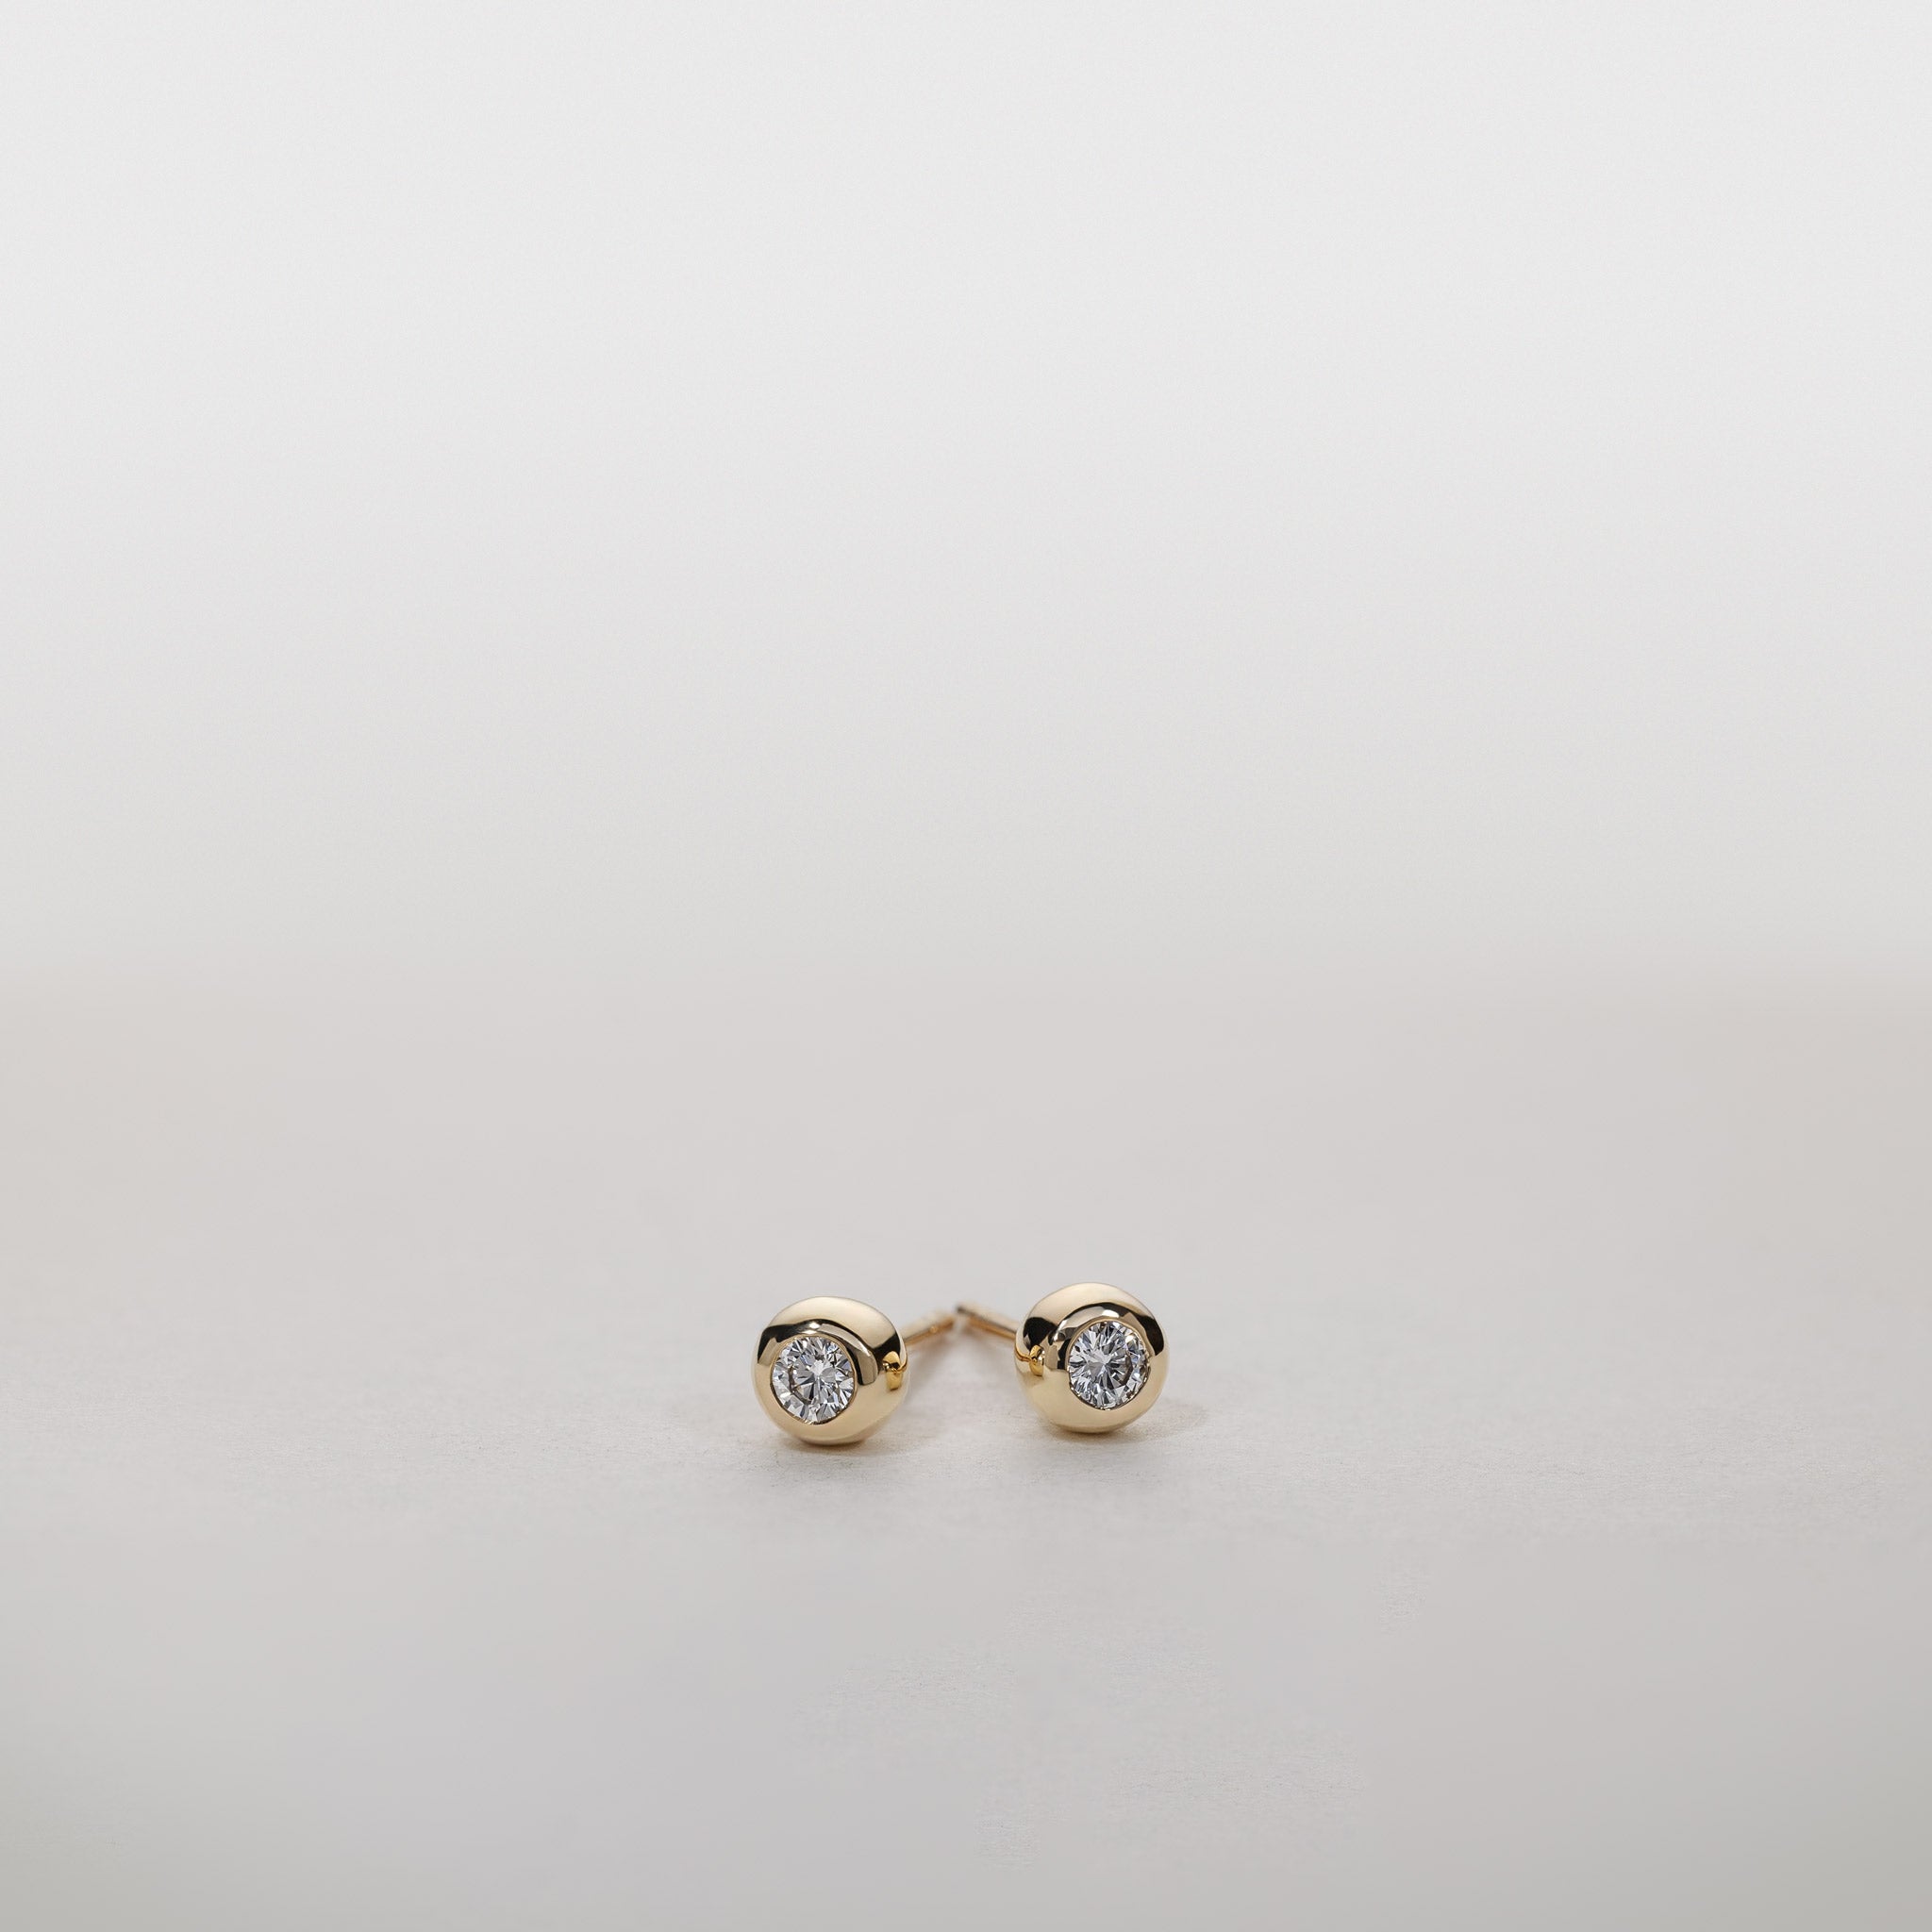 10K Yellow Gold bubble stud earrings 0.15ctw lab grown diamond with texture Ayah